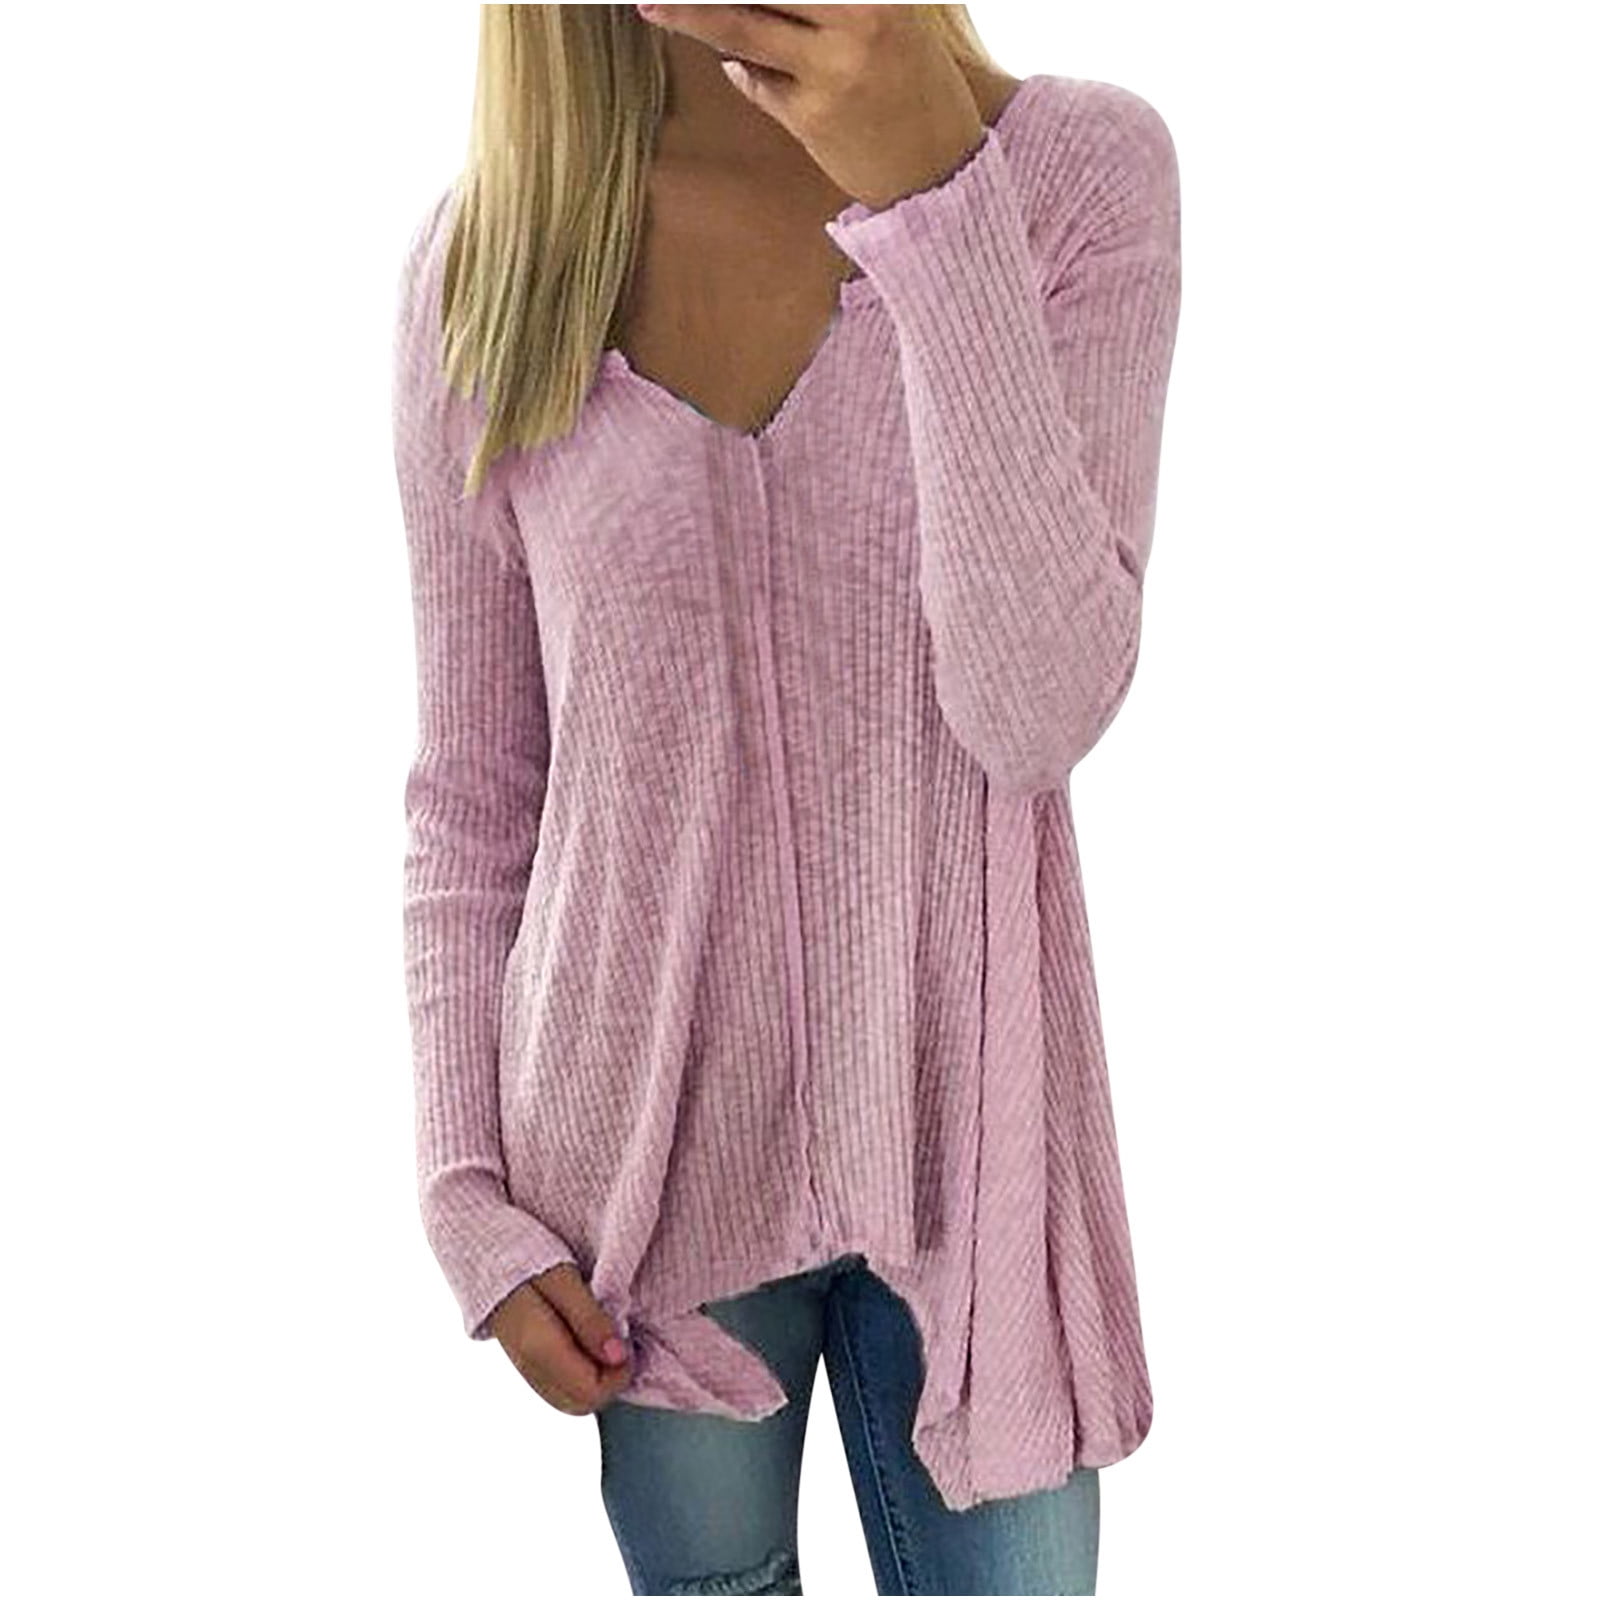 Buy Womens Cowl Neck Pullover Sweaters with Pockets Lantern Long Sleeve  Knit Casual Loose Bat Tunic Jumper Tops, Brick Red, X-Large at Amazon.in